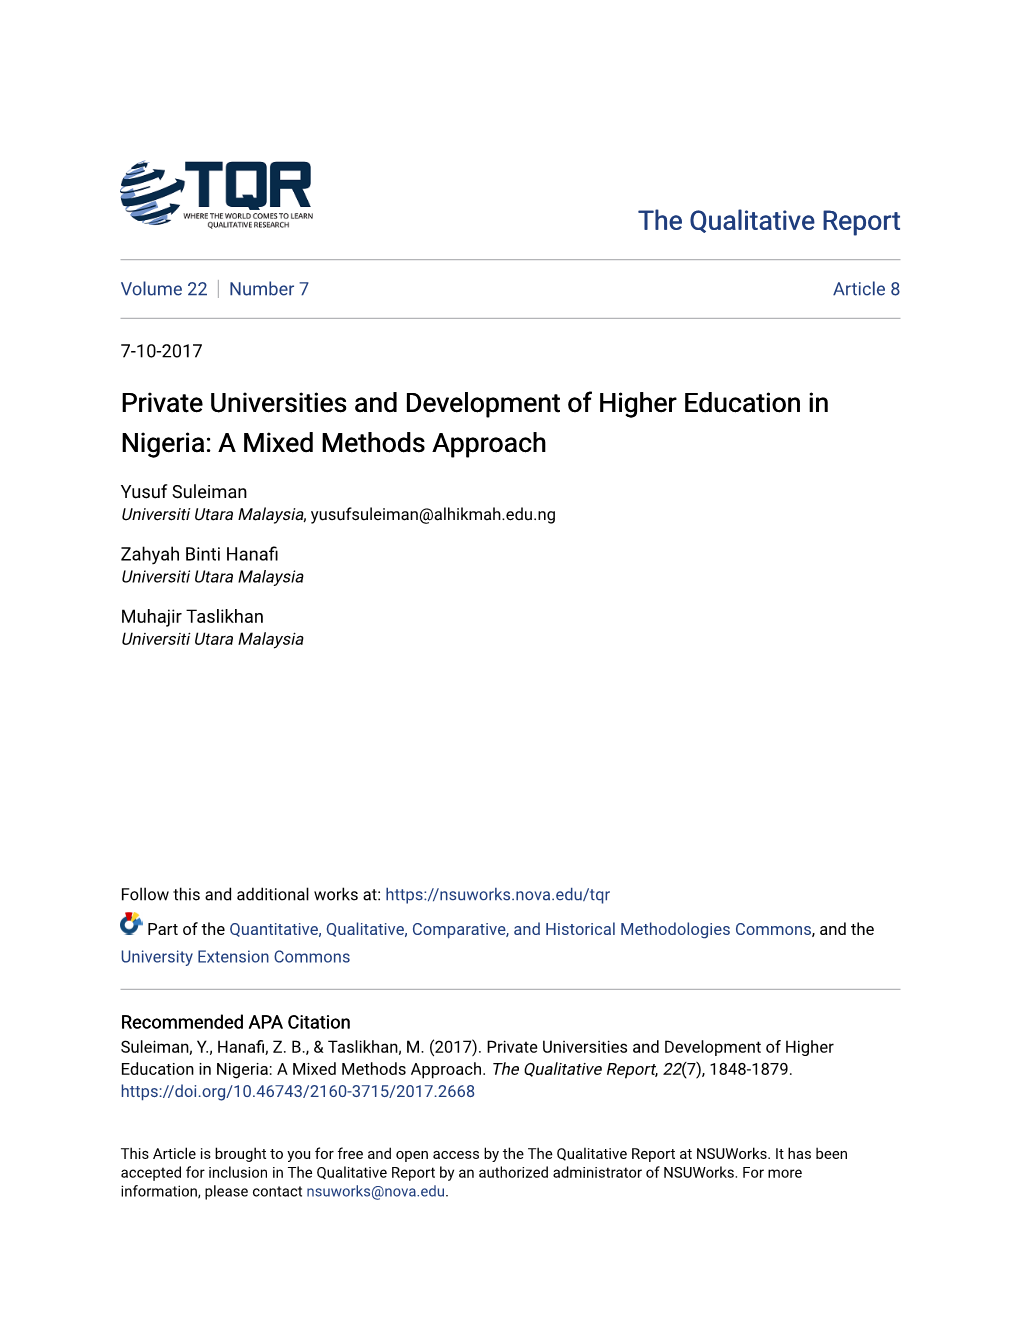 Private Universities and Development of Higher Education in Nigeria: a Mixed Methods Approach